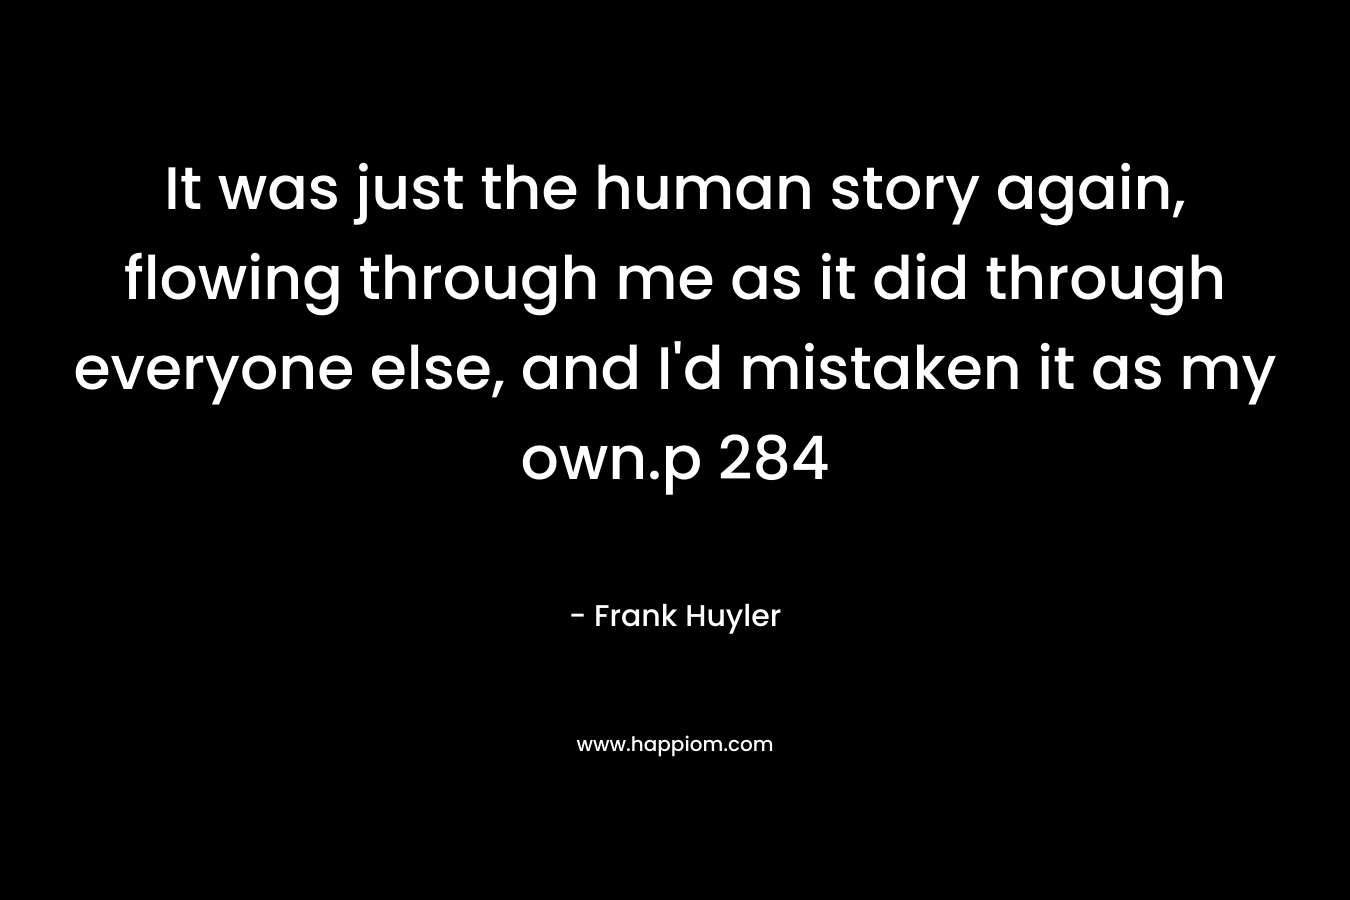 It was just the human story again, flowing through me as it did through everyone else, and I’d mistaken it as my own.p 284 – Frank Huyler